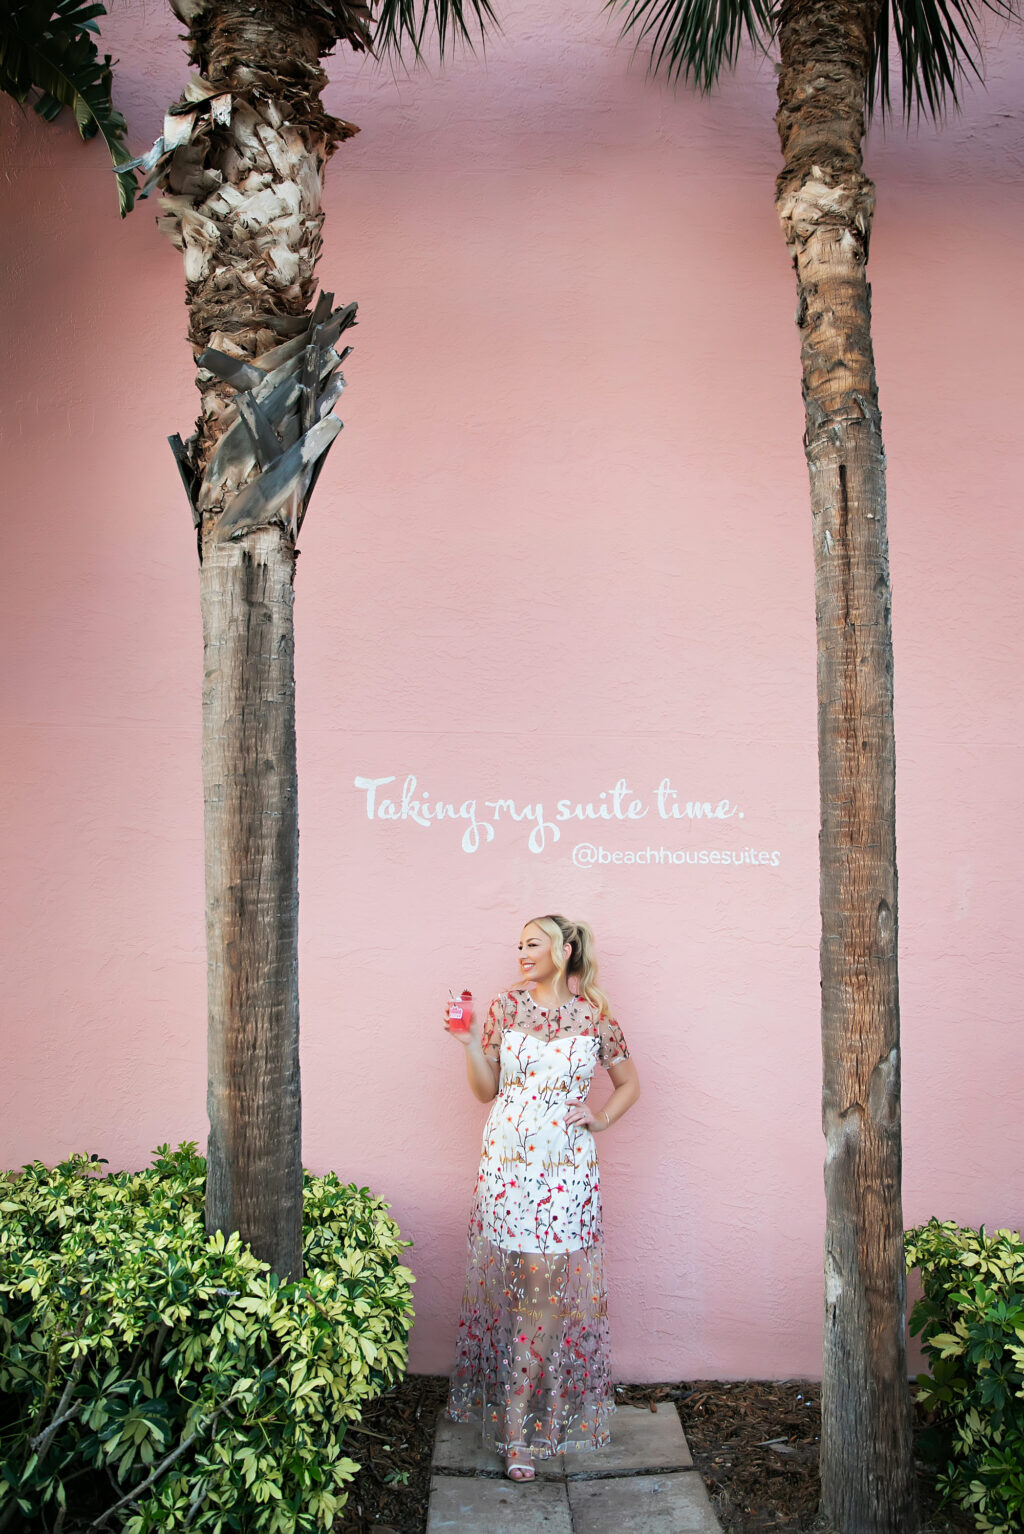 Don CeSar Beach Suites Vacation Travel Quote | St. Pete Beach Wedding Photographer Limelight Photography